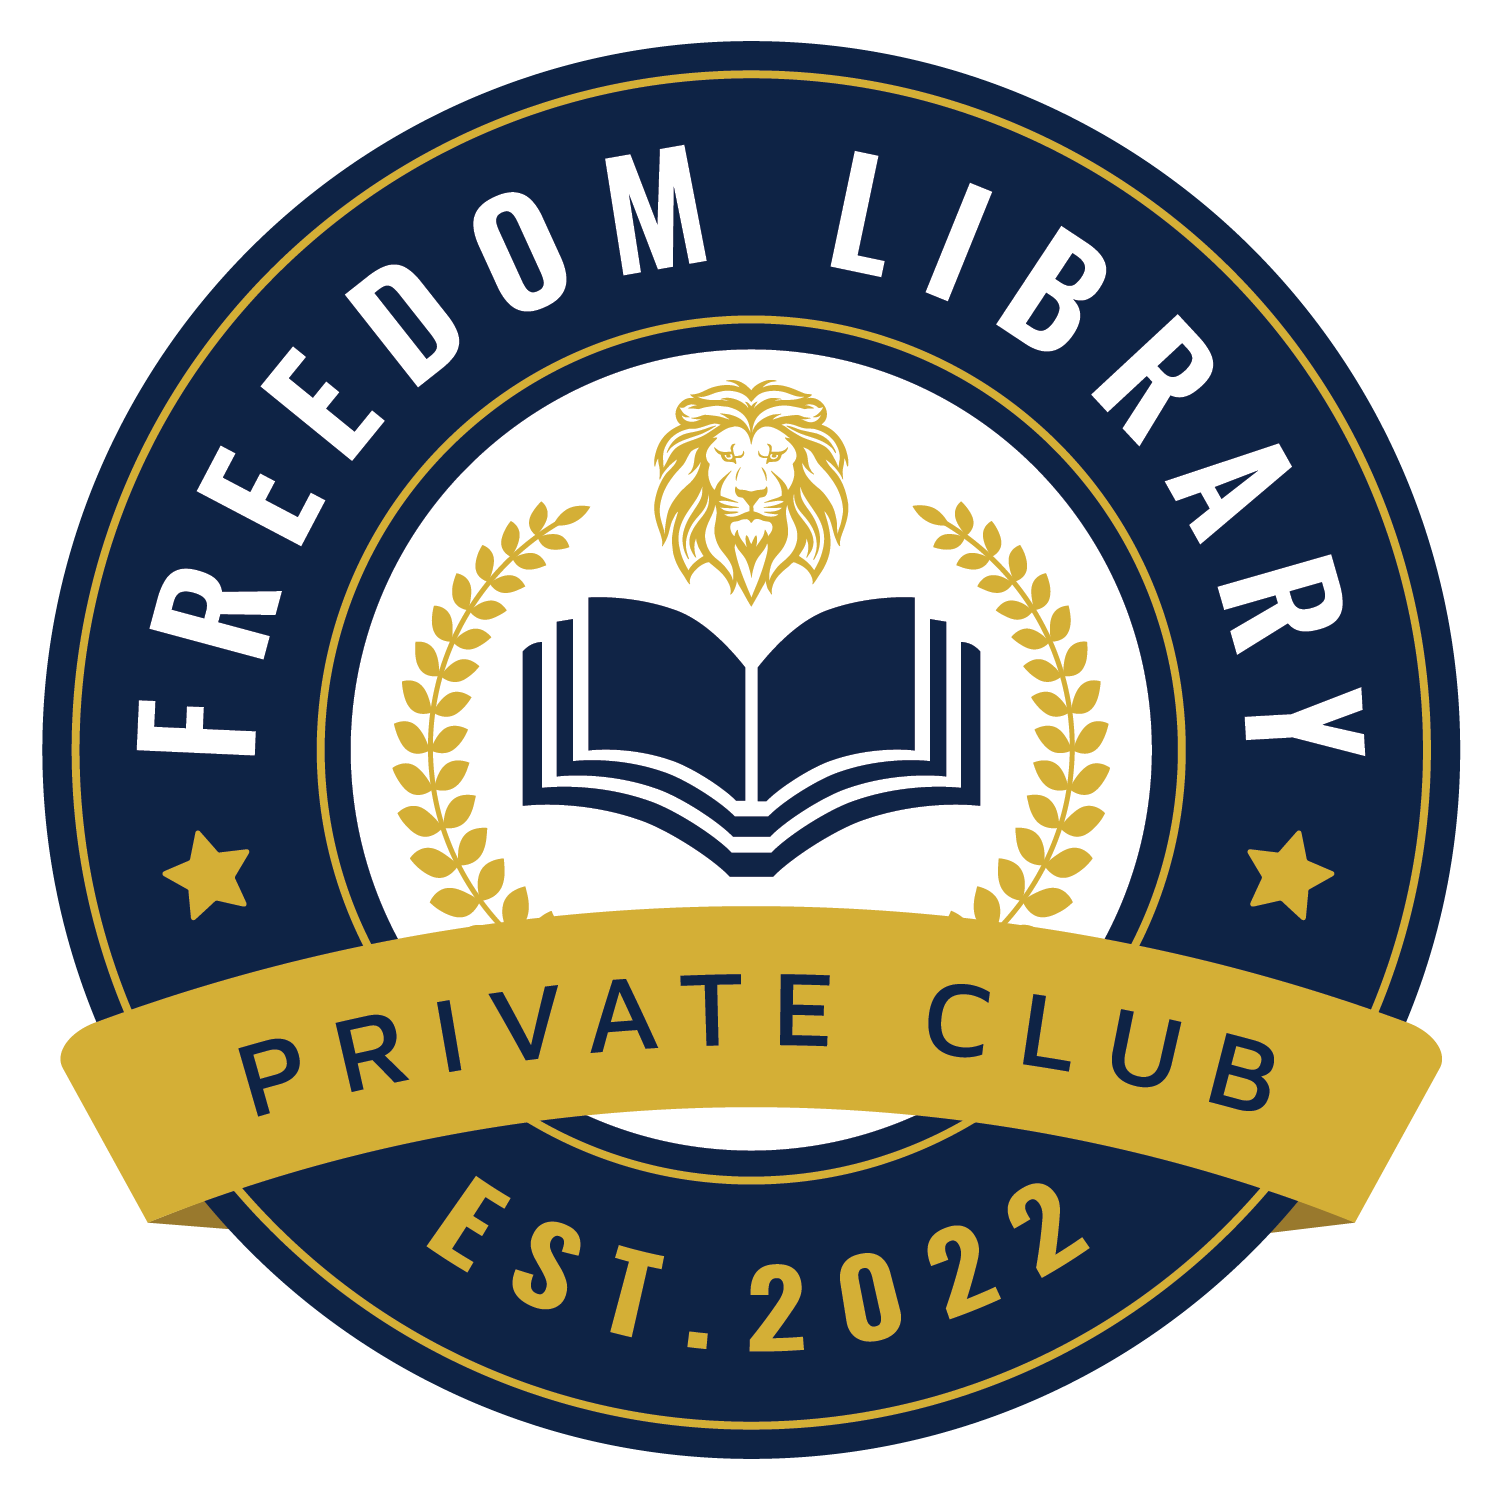 The Freedom Library - Where Freedom of Choice is always available.